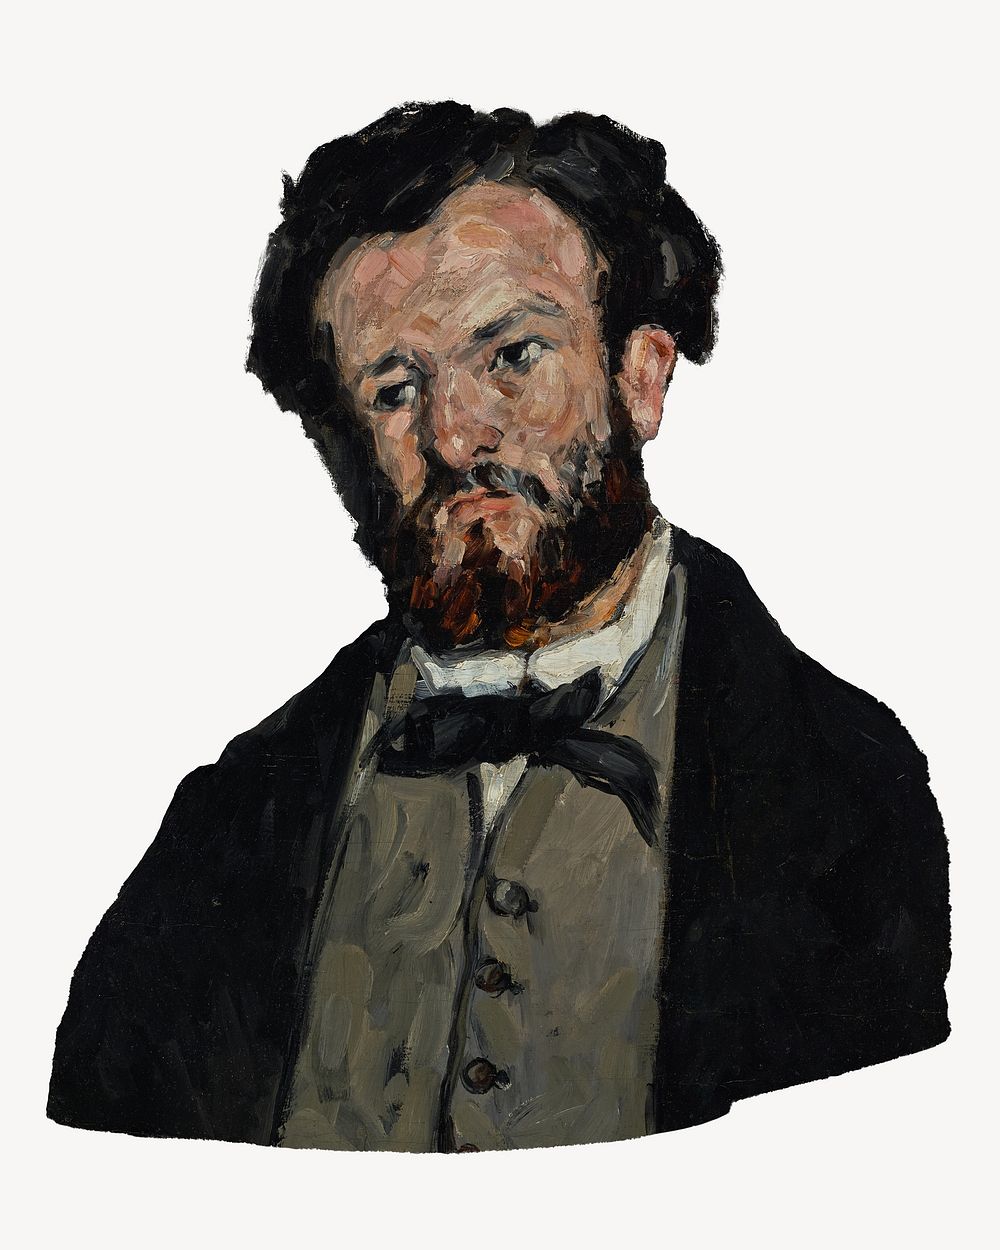  Paul Cezanne&rsquo;s Anthony Valabr&egrave;gue, post-impressionist portrait painting.   Remixed by rawpixel.